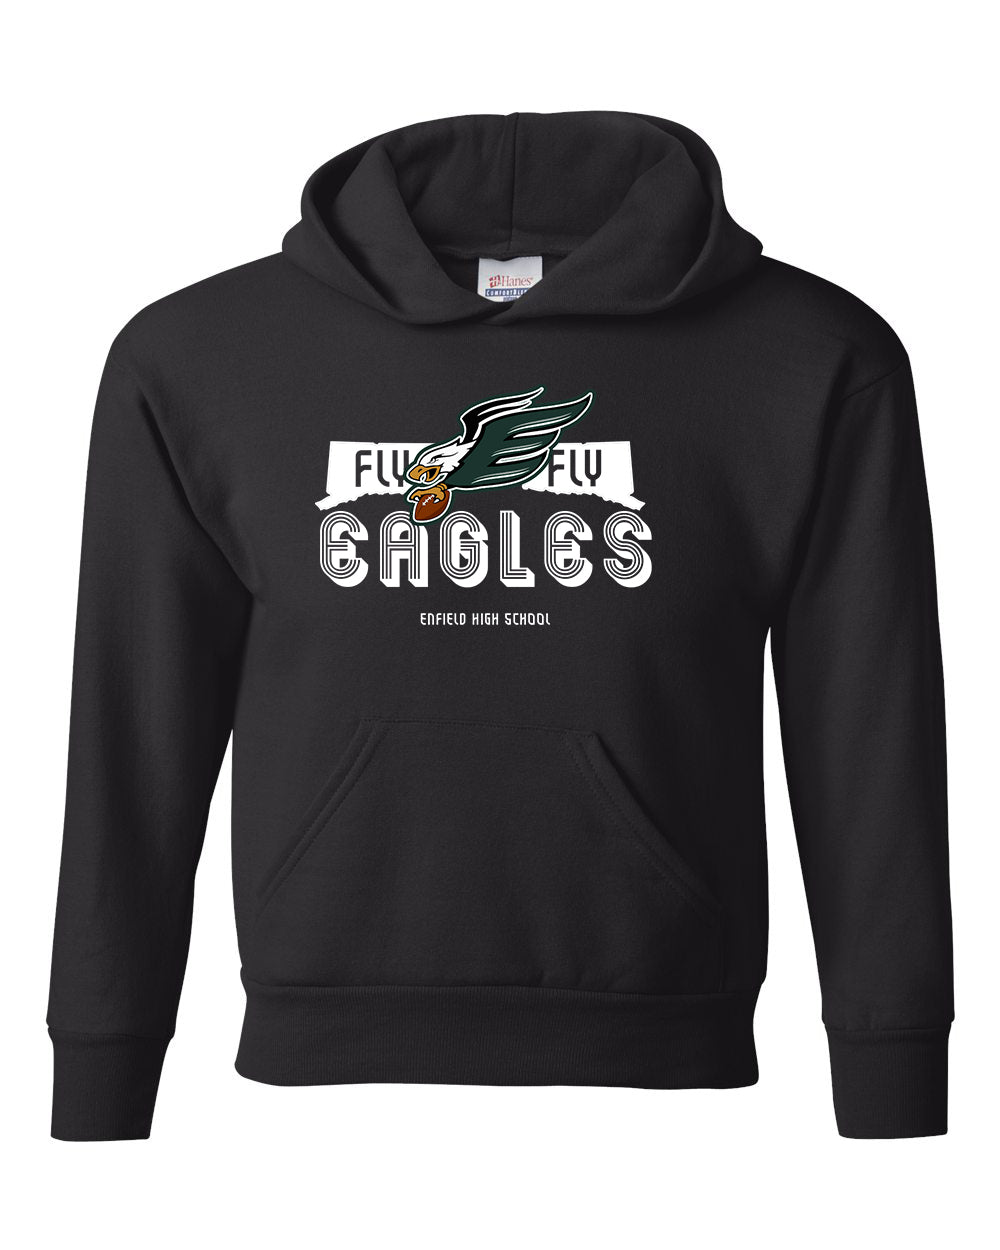 Enfield Eagles Football Youth Hoodie "Fly" - P473 (color options available)